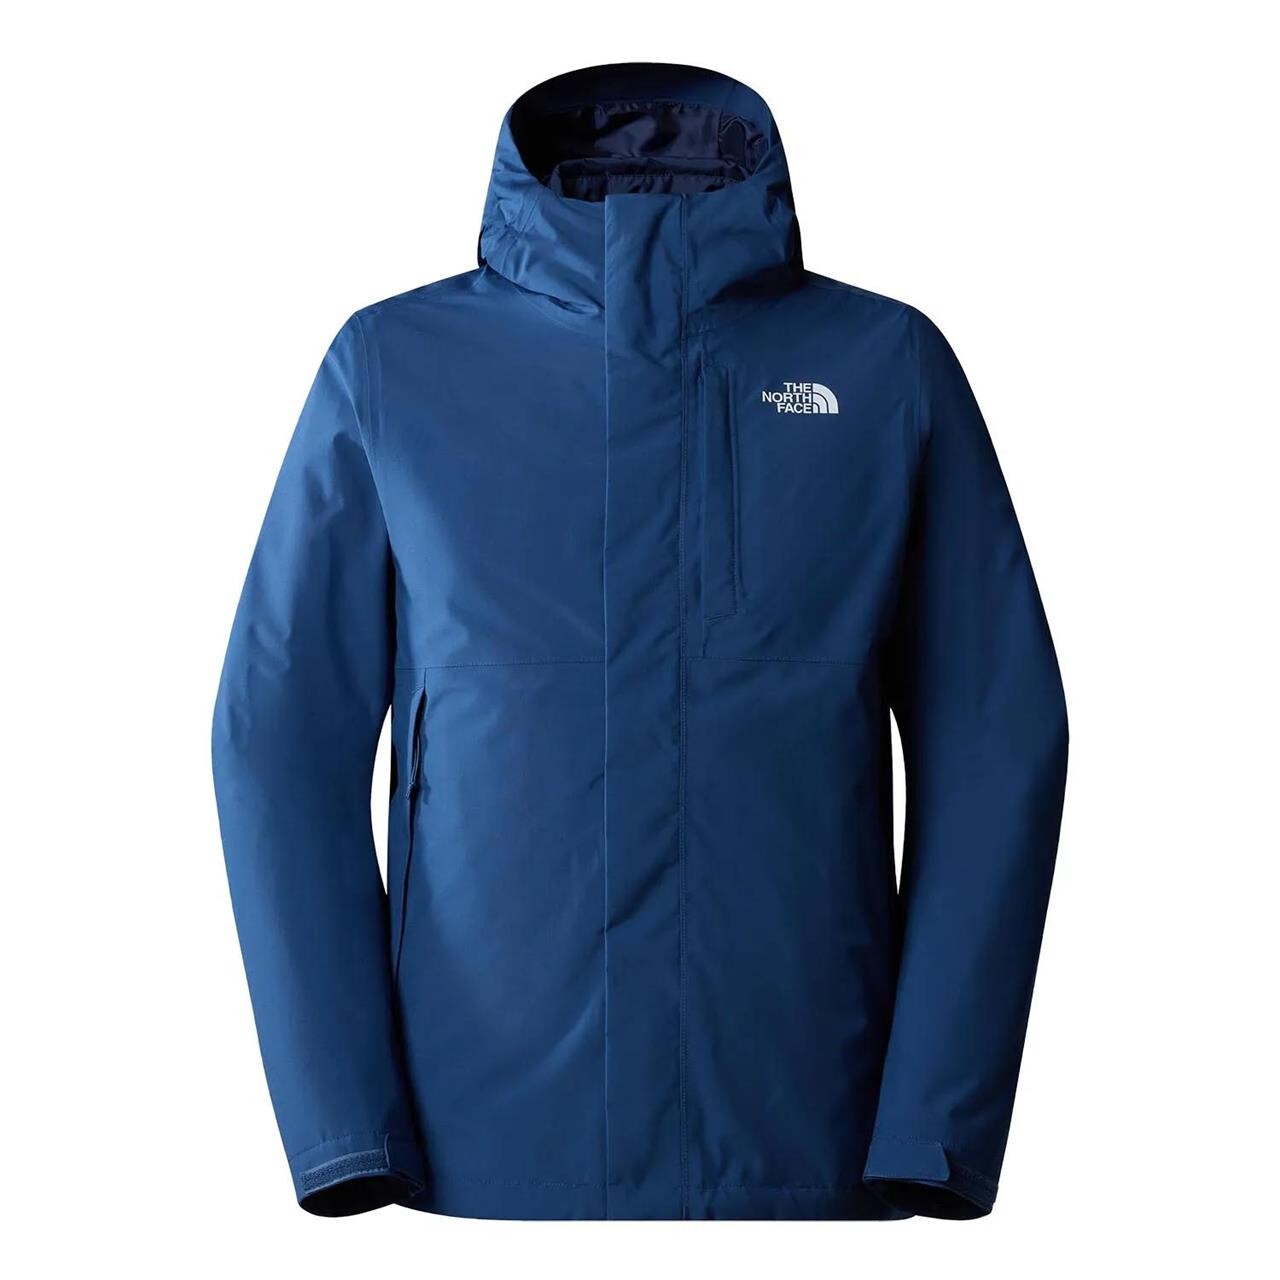 Billede af The North Face Mens Carto Triclimate Jacket (Blå (SHADY BLUE/SUMMIT NAVY) Small)